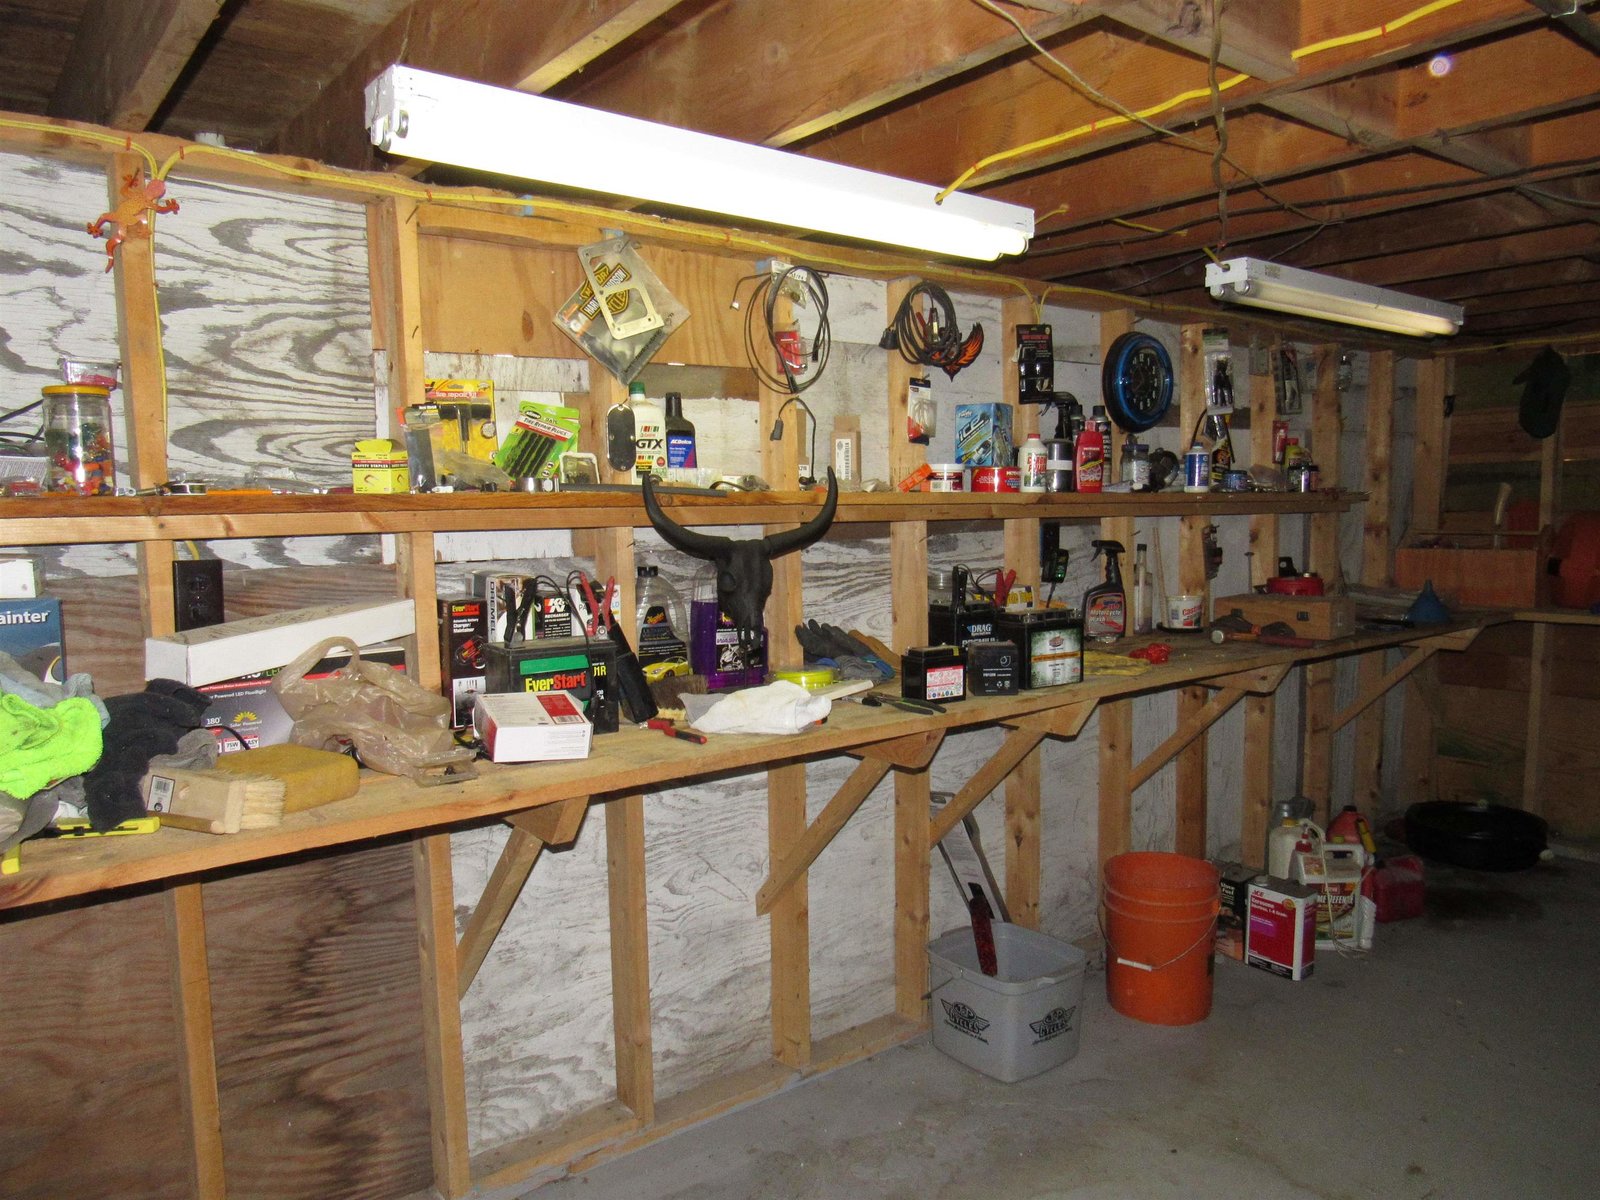 Some storage and work area